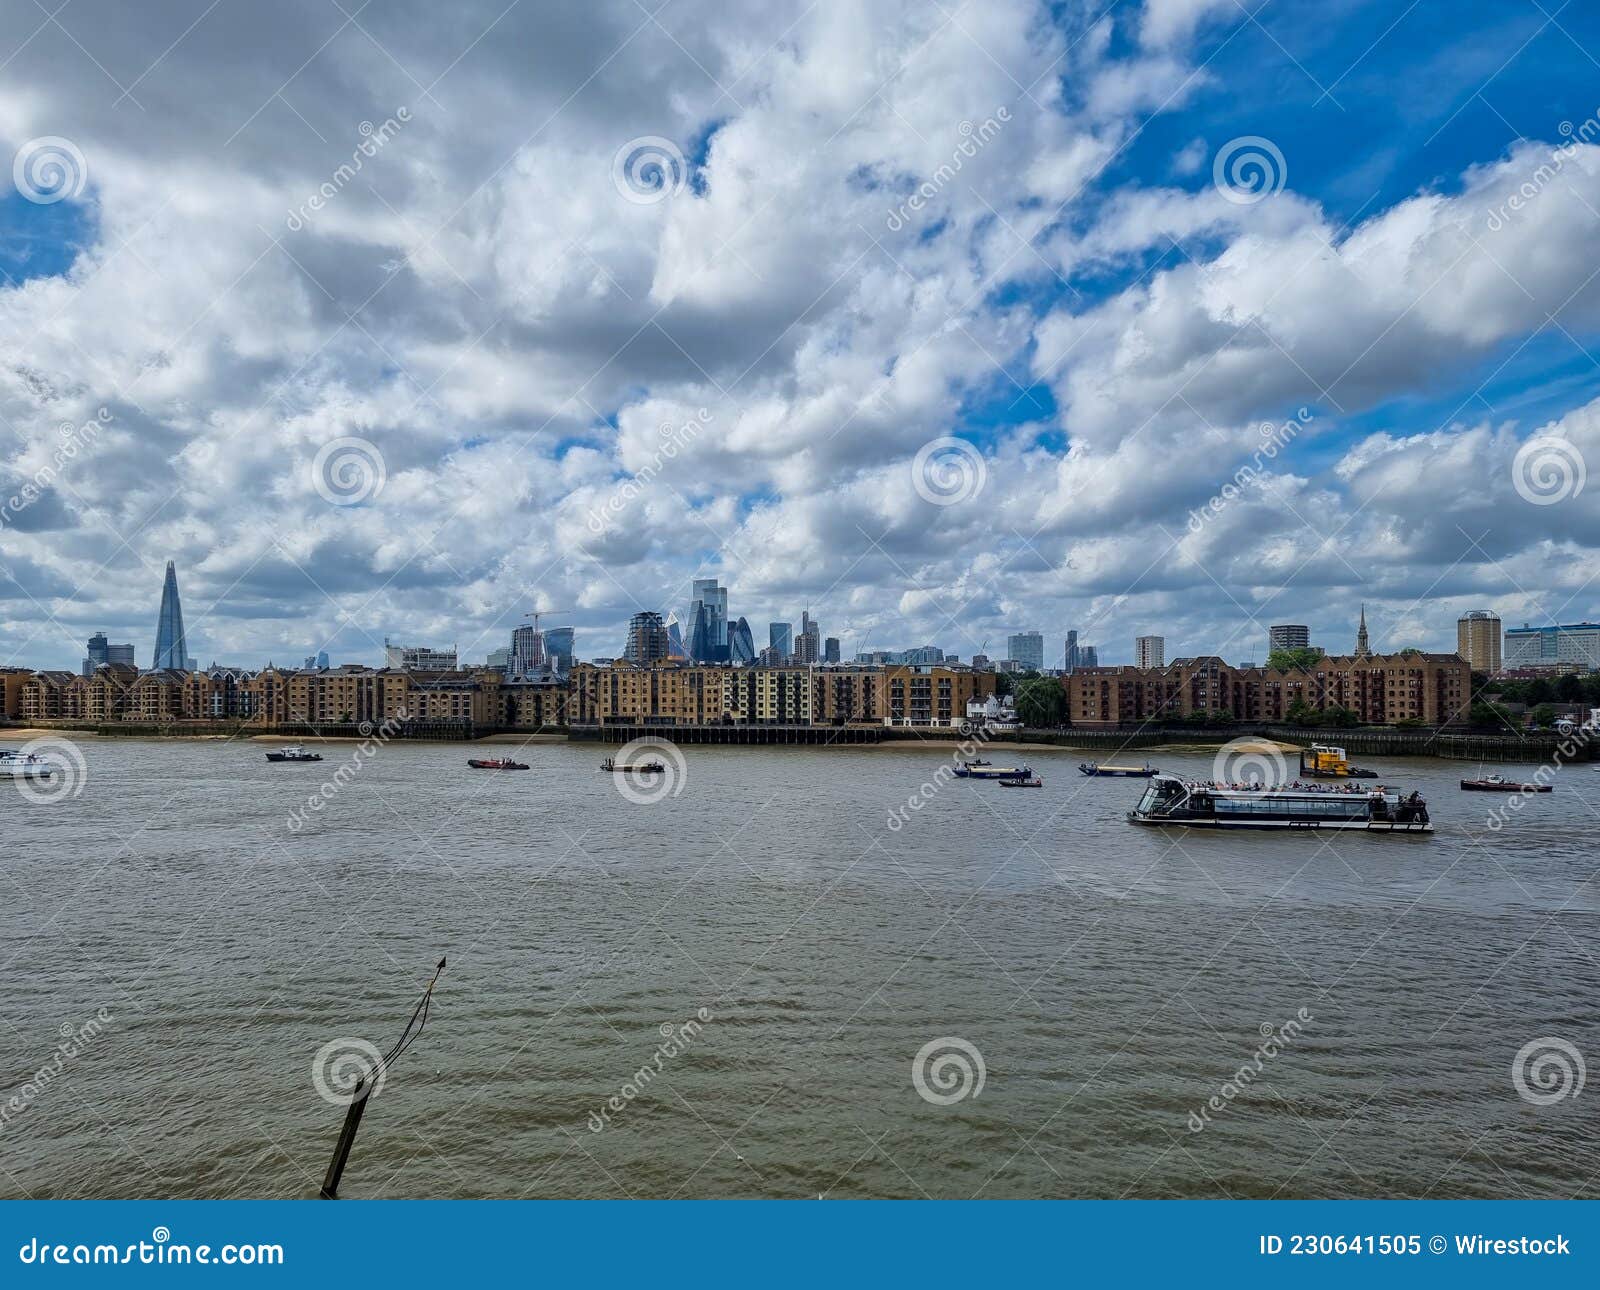 Flotilla of Boats Take Part in Thames Barge Driving Race, London ...